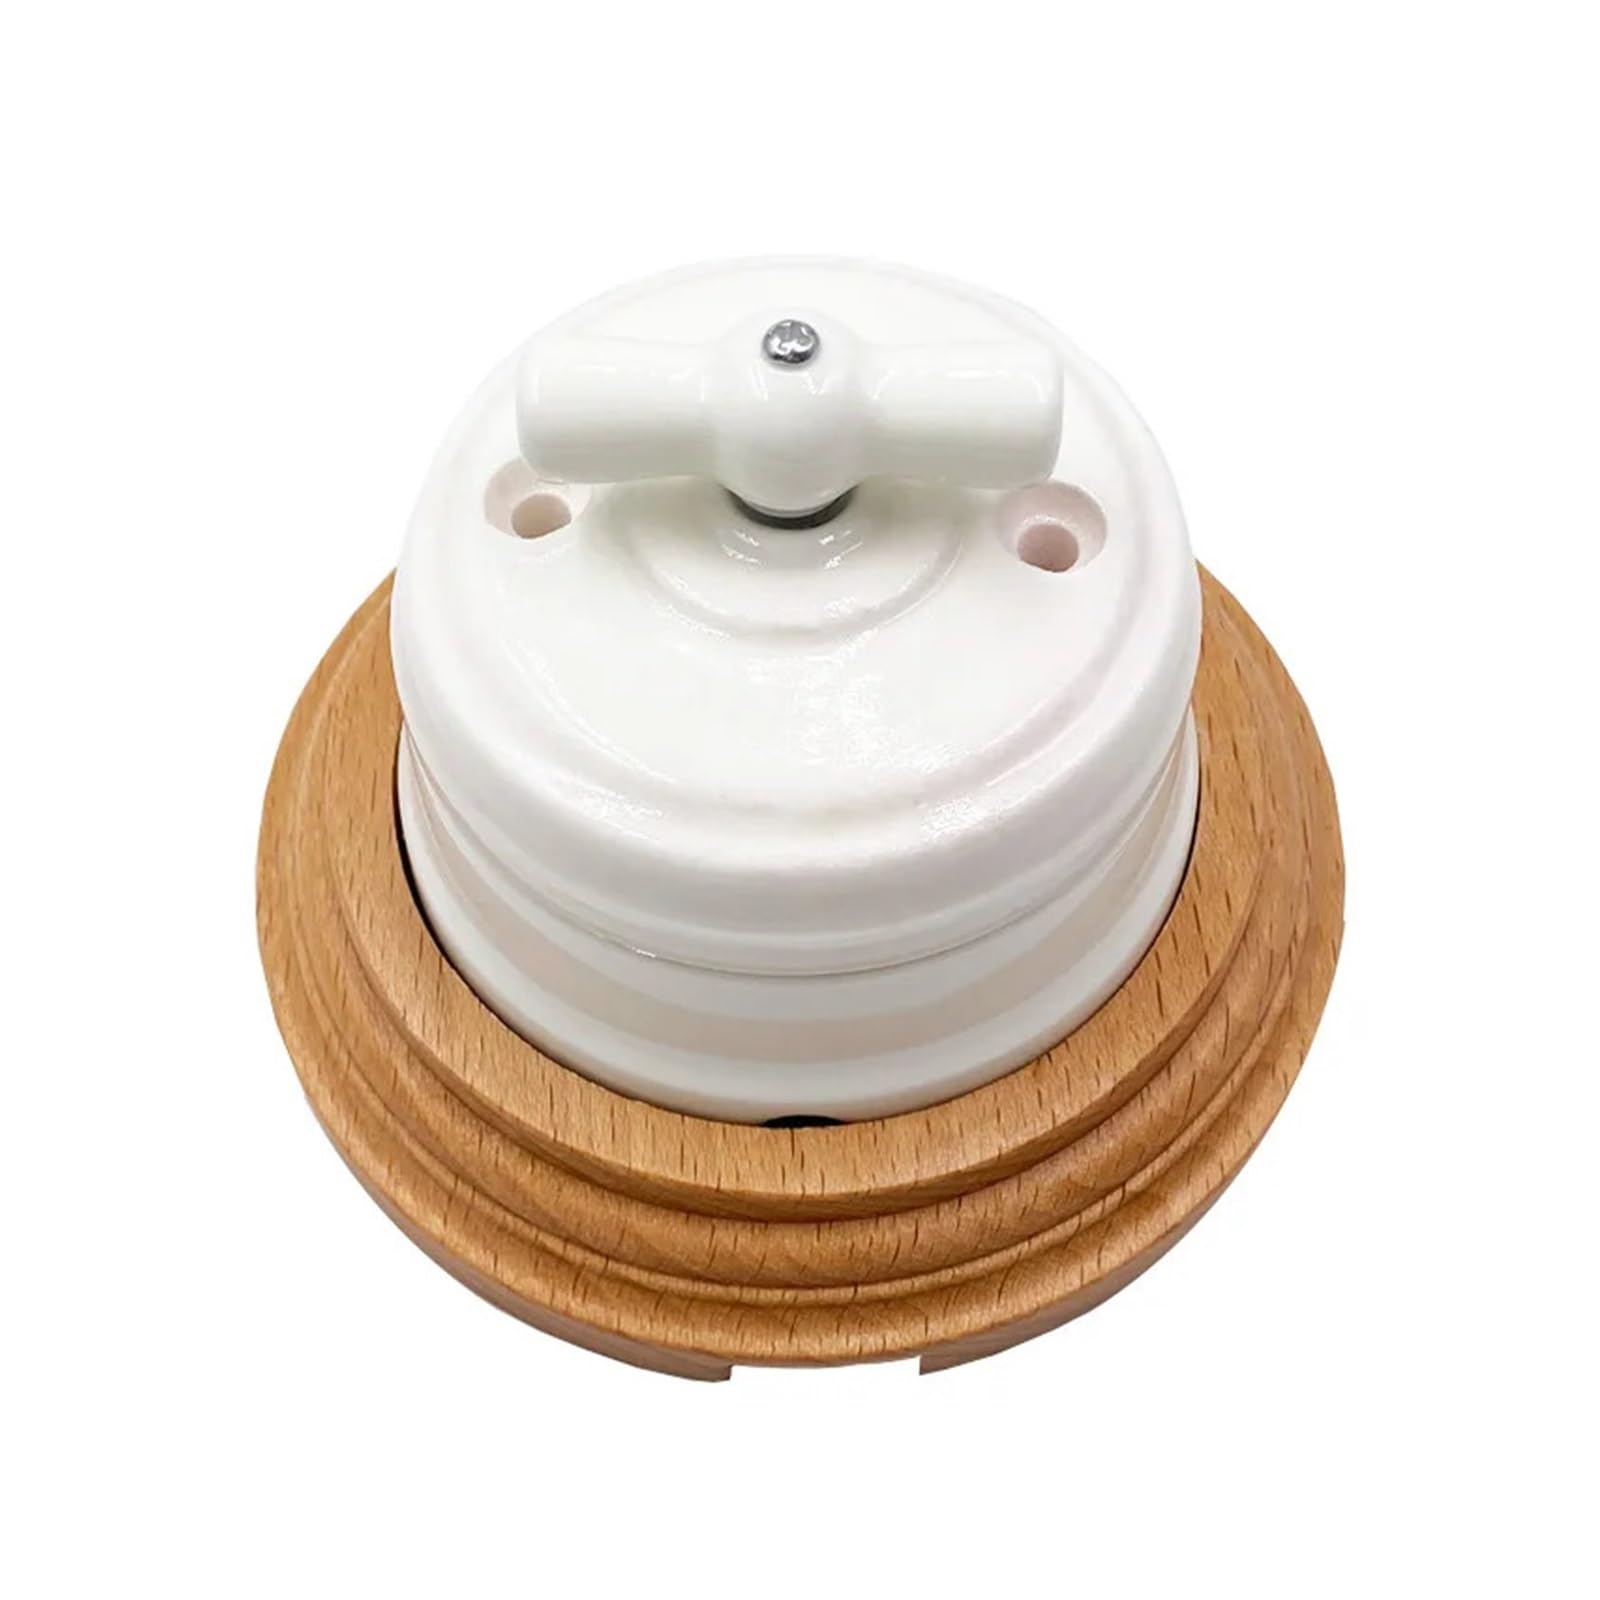 European Style Retro Ceramic Switch Socket 16A Wall Electrical For Home Improvement ZMBMNNWQ(1-hole Wood Base) von ZMBMNNWQ